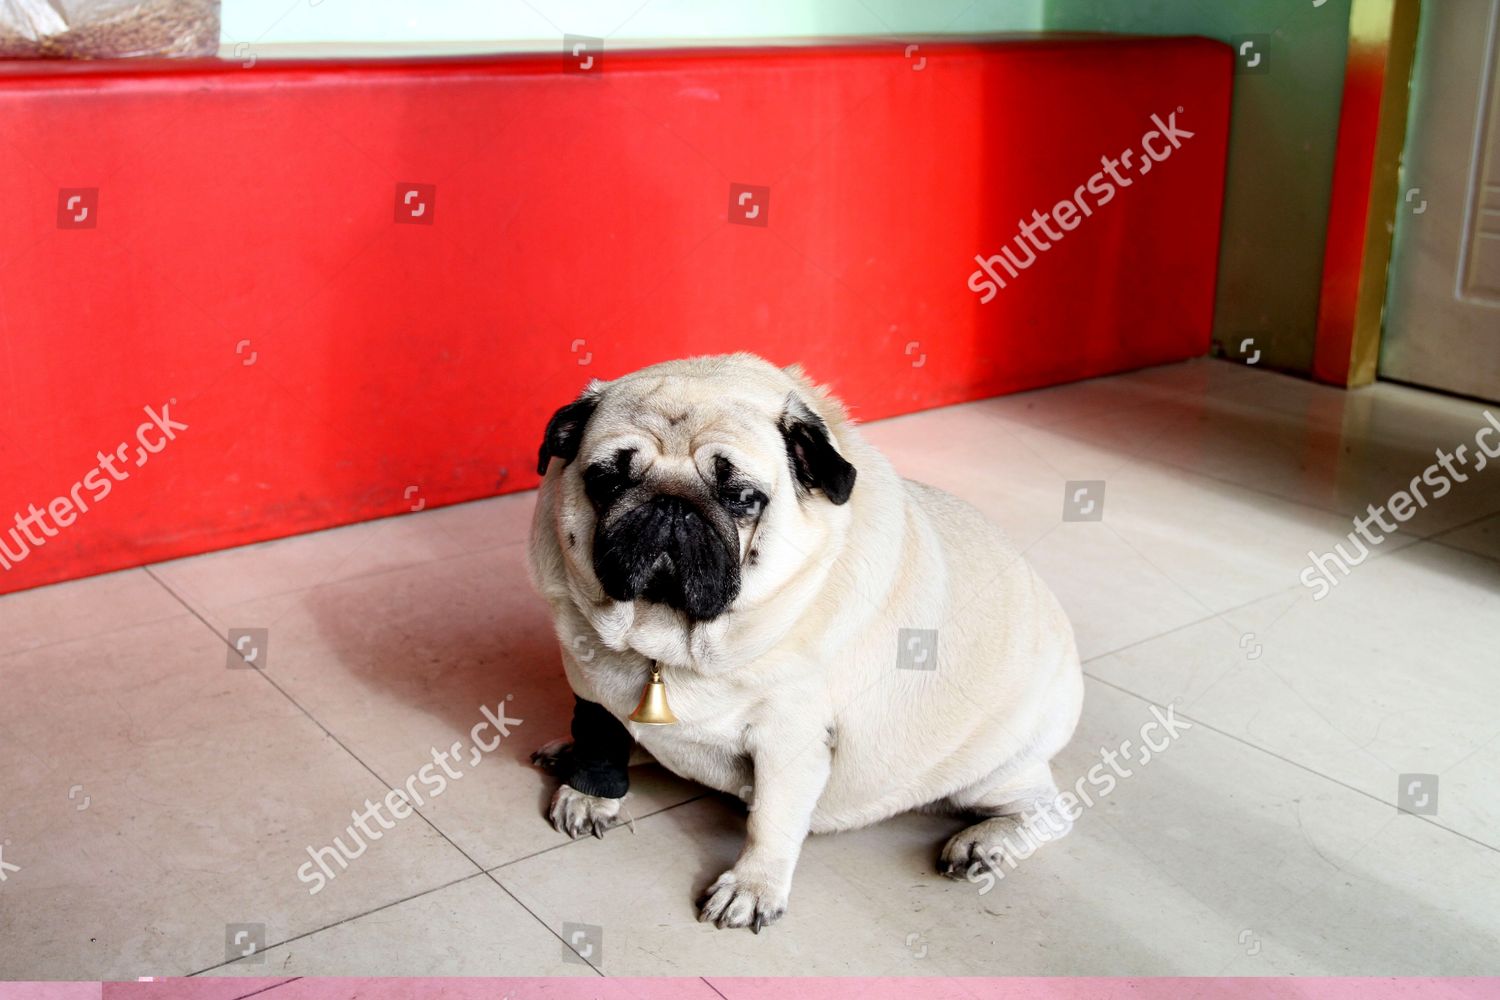 Chubby Pug Jia Bao Who Weighs Editorial Stock Photo - Stock Image